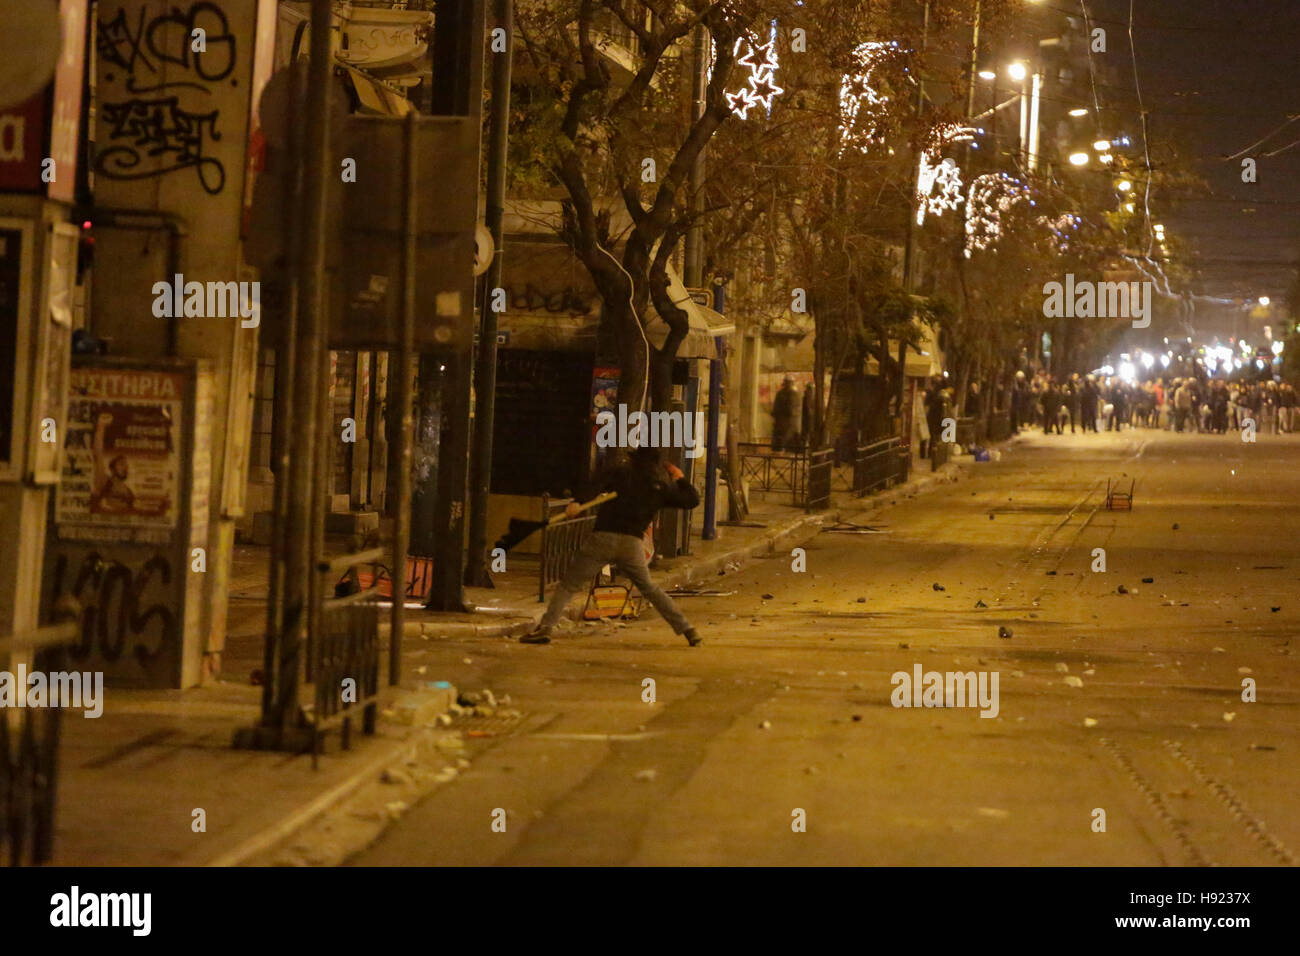 Athens, Greece. 17th Nov, 2016. A protester throws stones at the police. The protest march from the Athens Polytechnic to the US embassy that is held as part of the 1973 Athens Polytechnic uprising commemoration turnt violent, when protesters who barricaded themselves inside the Polytechnic attacked riot police officers with stones and petrol bombs. © Michael Debets/Pacific Press/Alamy Live News Stock Photo